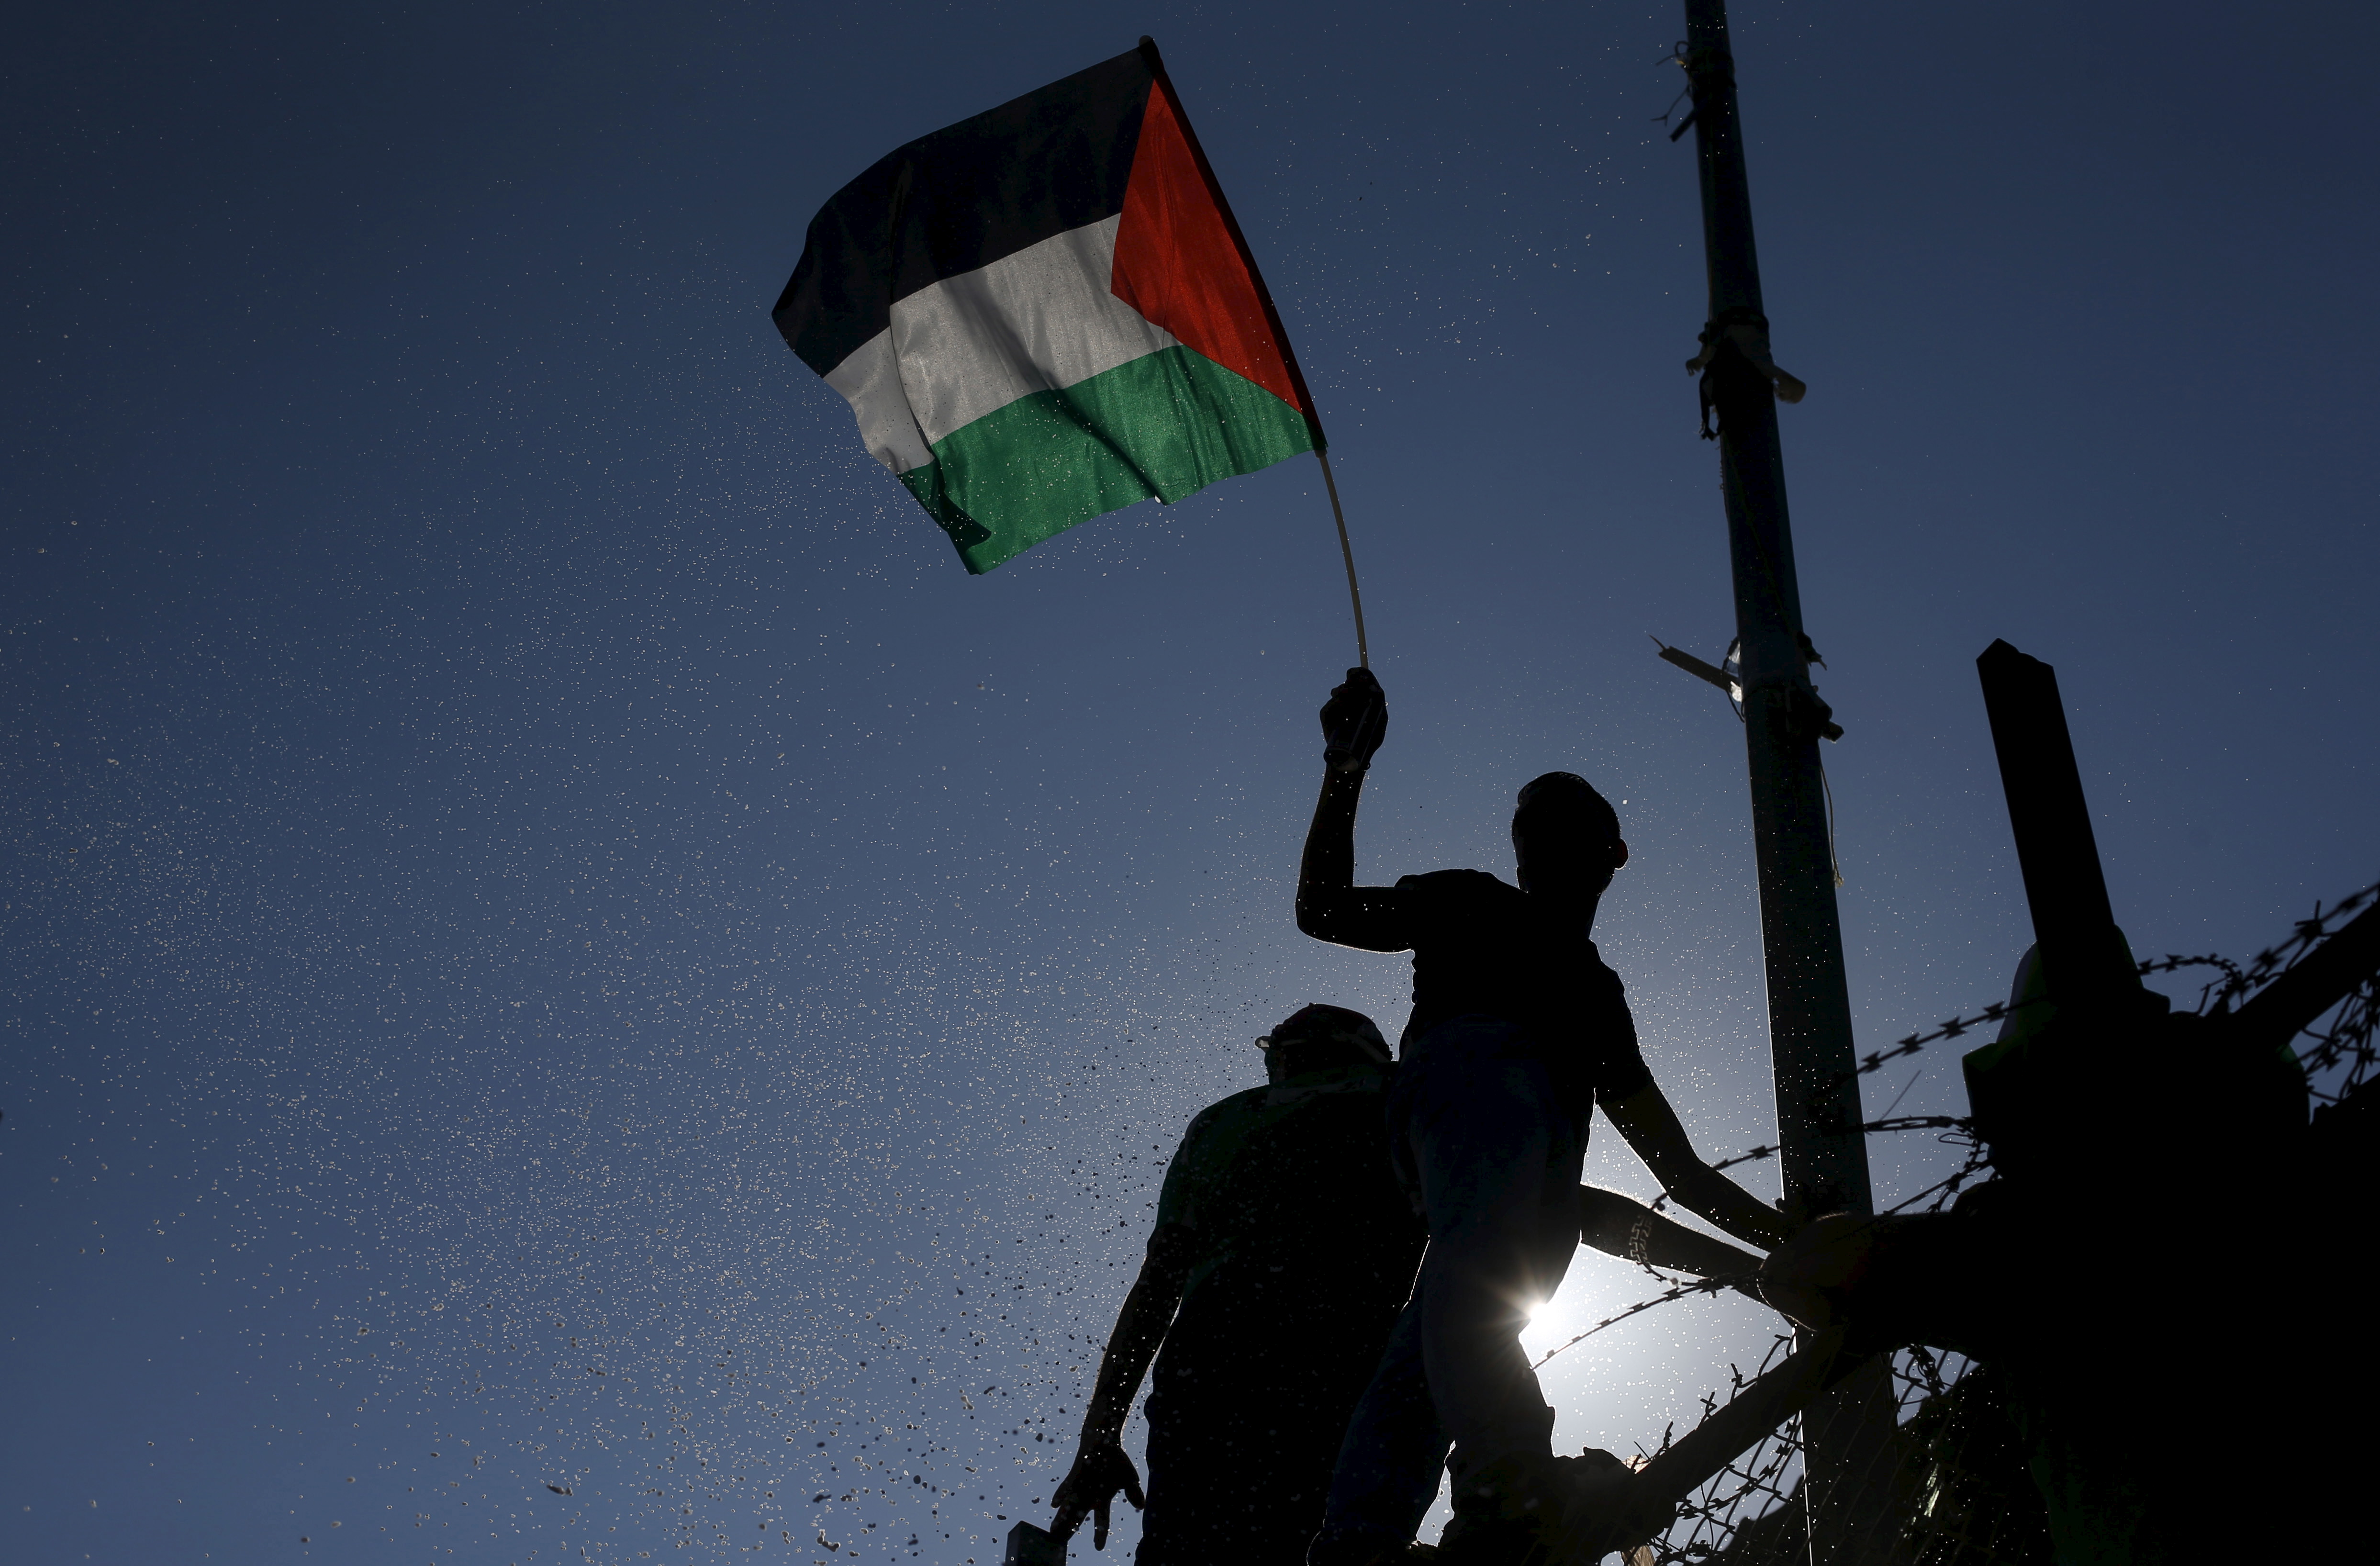 A spectator waves a Palestinian flag during the first leg of the Palestine Cup final soccer match between Gaza Strip's Shejaia and Hebron's Al-Ahly at al-Yarmouk stadium in Gaza City August 6, 2015.